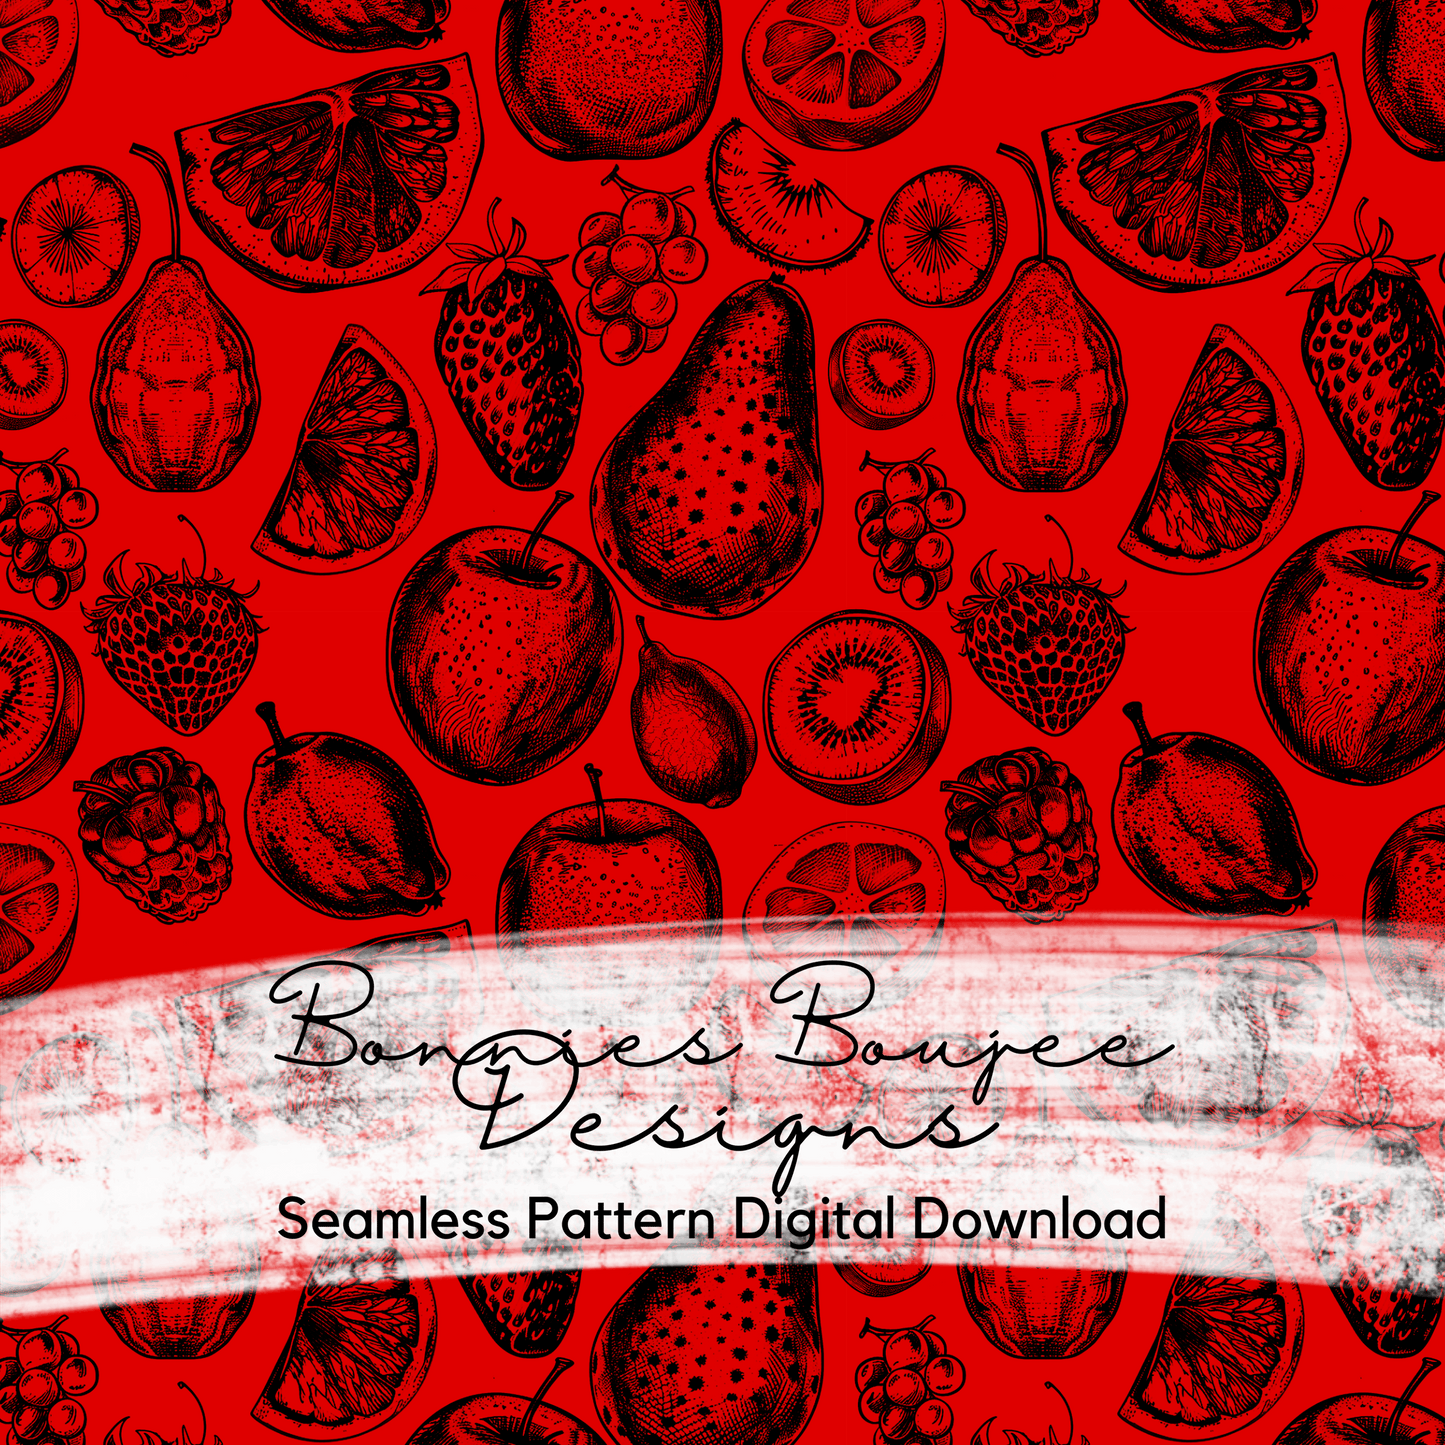 Sketched Fruits on Solid Colored Background Bundle Seamless files including SWIM SAFE colors